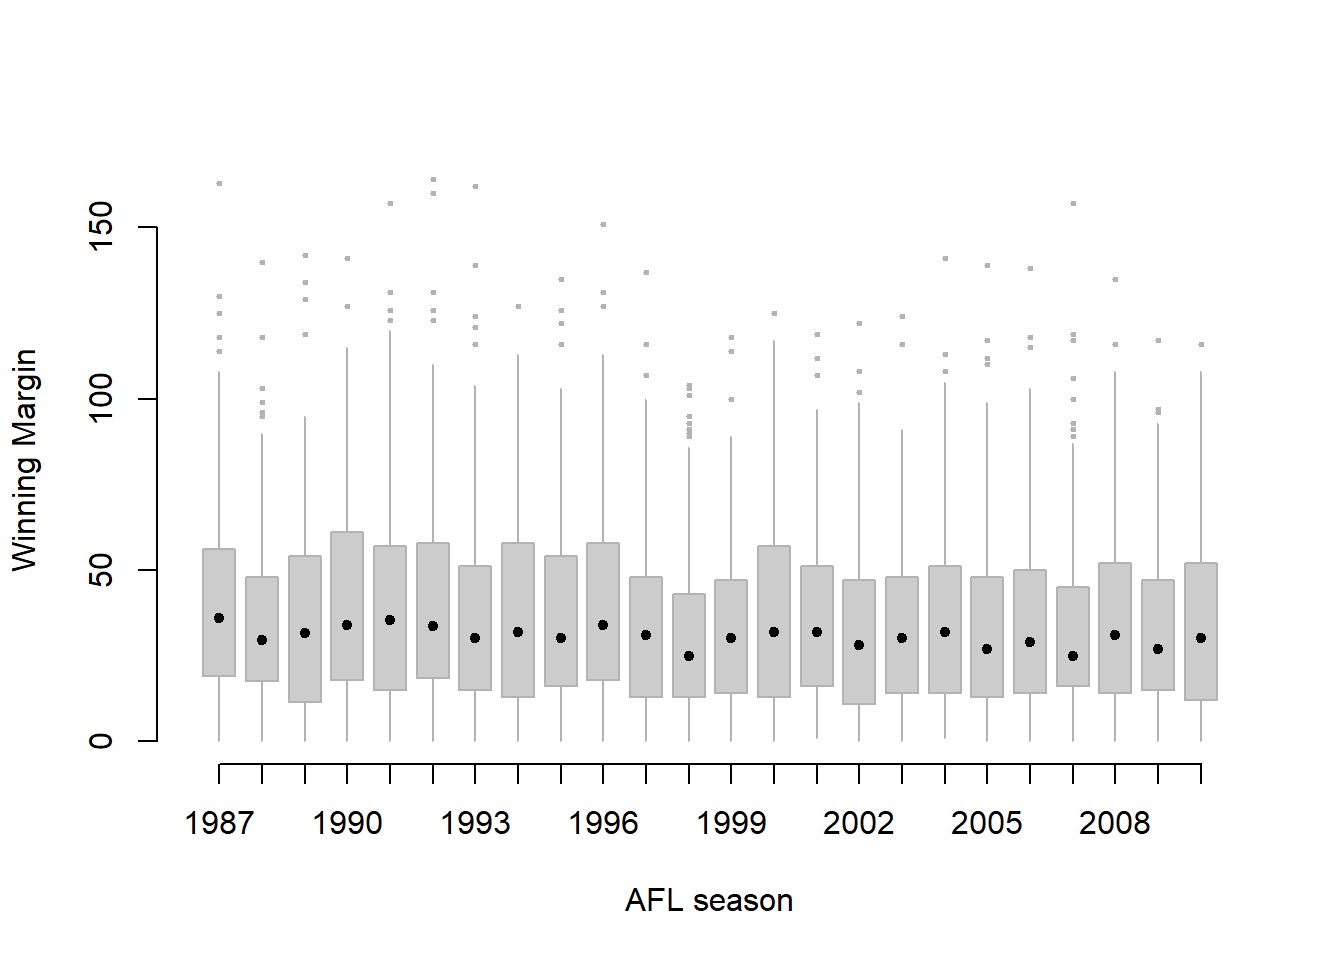 A cleaned up version of Figure \@ref(fig:multipleboxplots). Notice that I've used a very minimalist design for the boxplots, so as to focus the eye on the medians. I've also converted the medians to solid dots, to convey a sense that year to year variation in the median should be thought of as a single coherent plot (similar to what we did when plotting the `Fibonacci` variable earlier). The size of outliers has been shrunk, because they aren't actually very interesting. In contrast, I've added a fill colour to the boxes, to make it easier to look at the trend in the interquartile range across years.